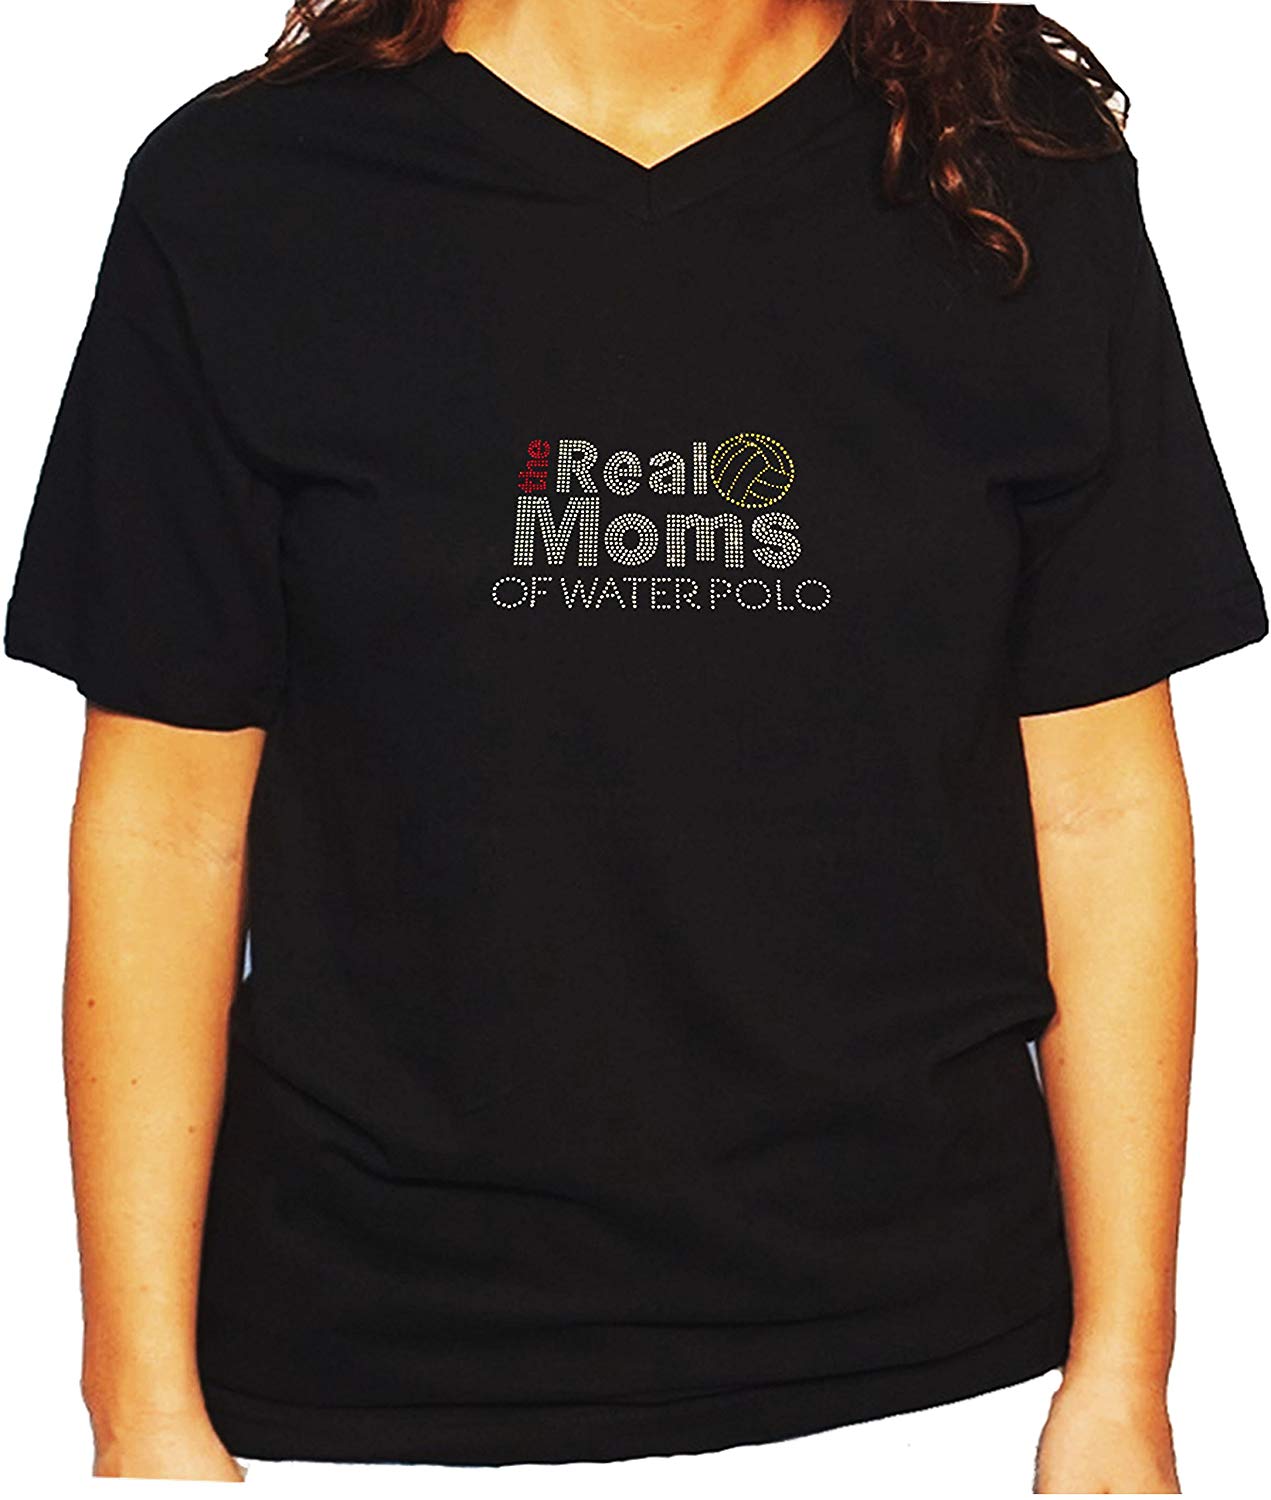 Women's / Unisex T-Shirt with The Real Moms of Water Polo in Rhinestones